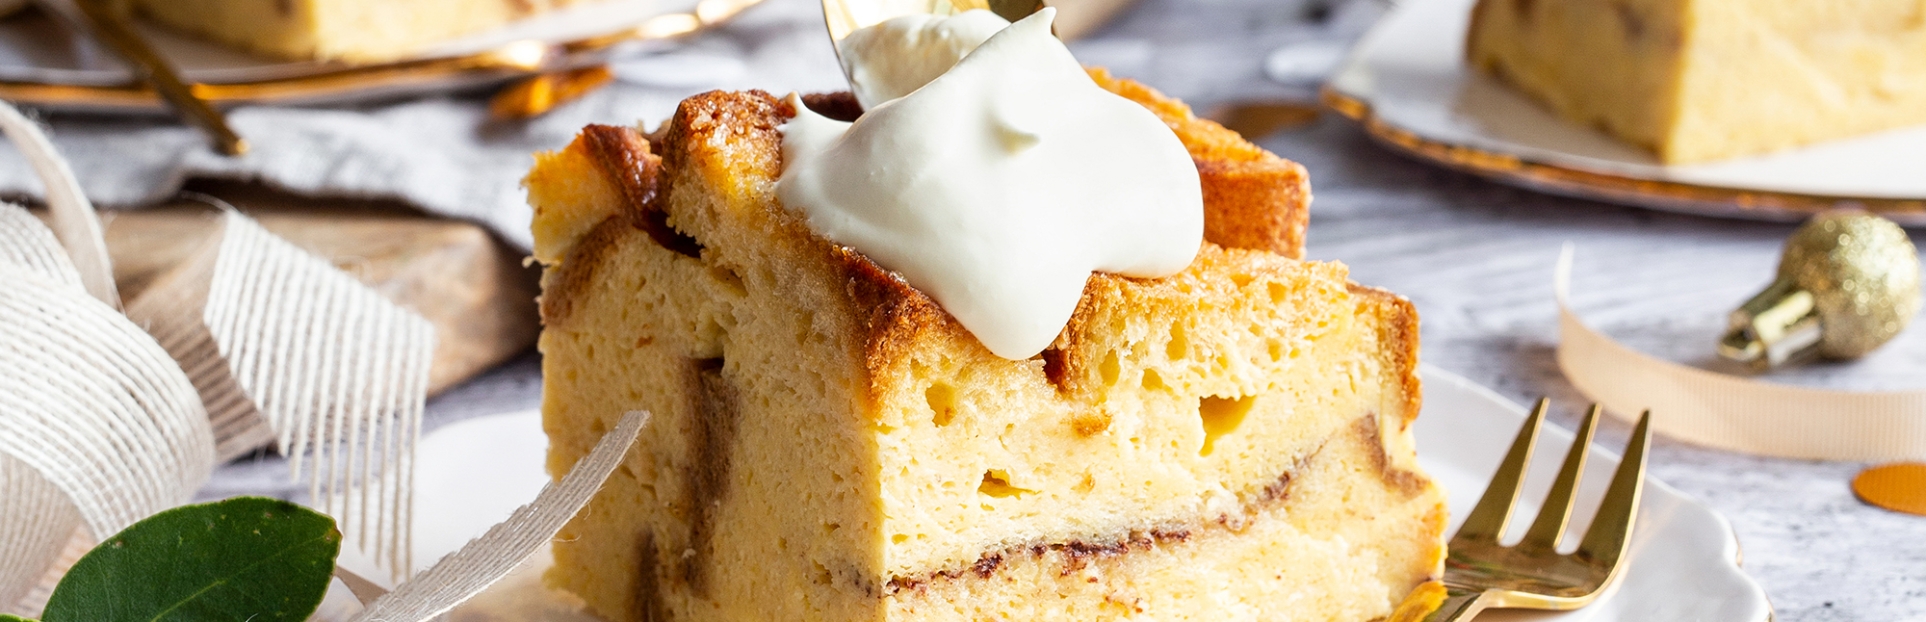 an image of avonmore bread and butter pudding